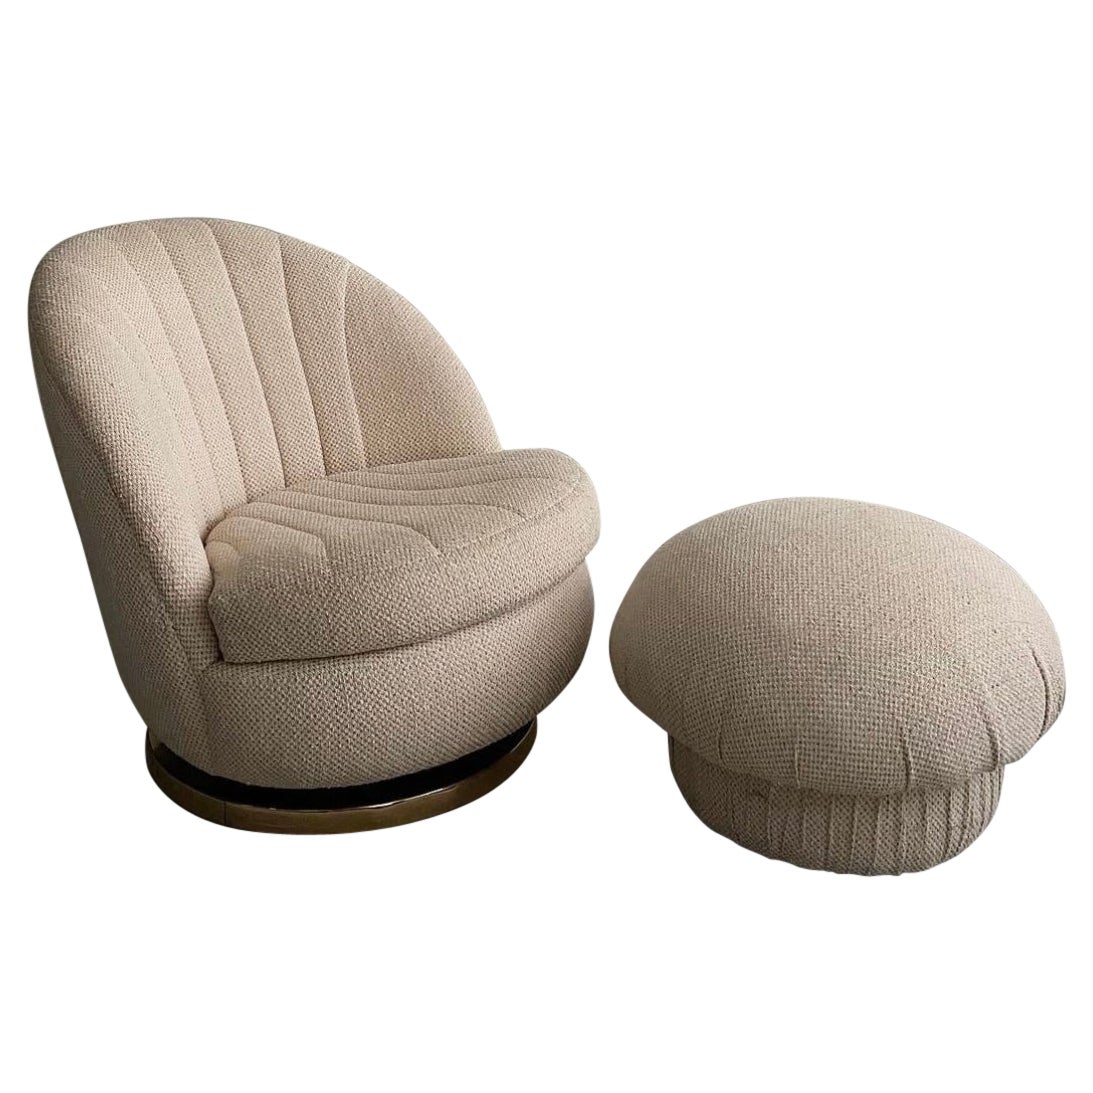 Lounge Chair and Ottoman Designed by Milo Baughman for Thayer Cogginn - 2 Pieces